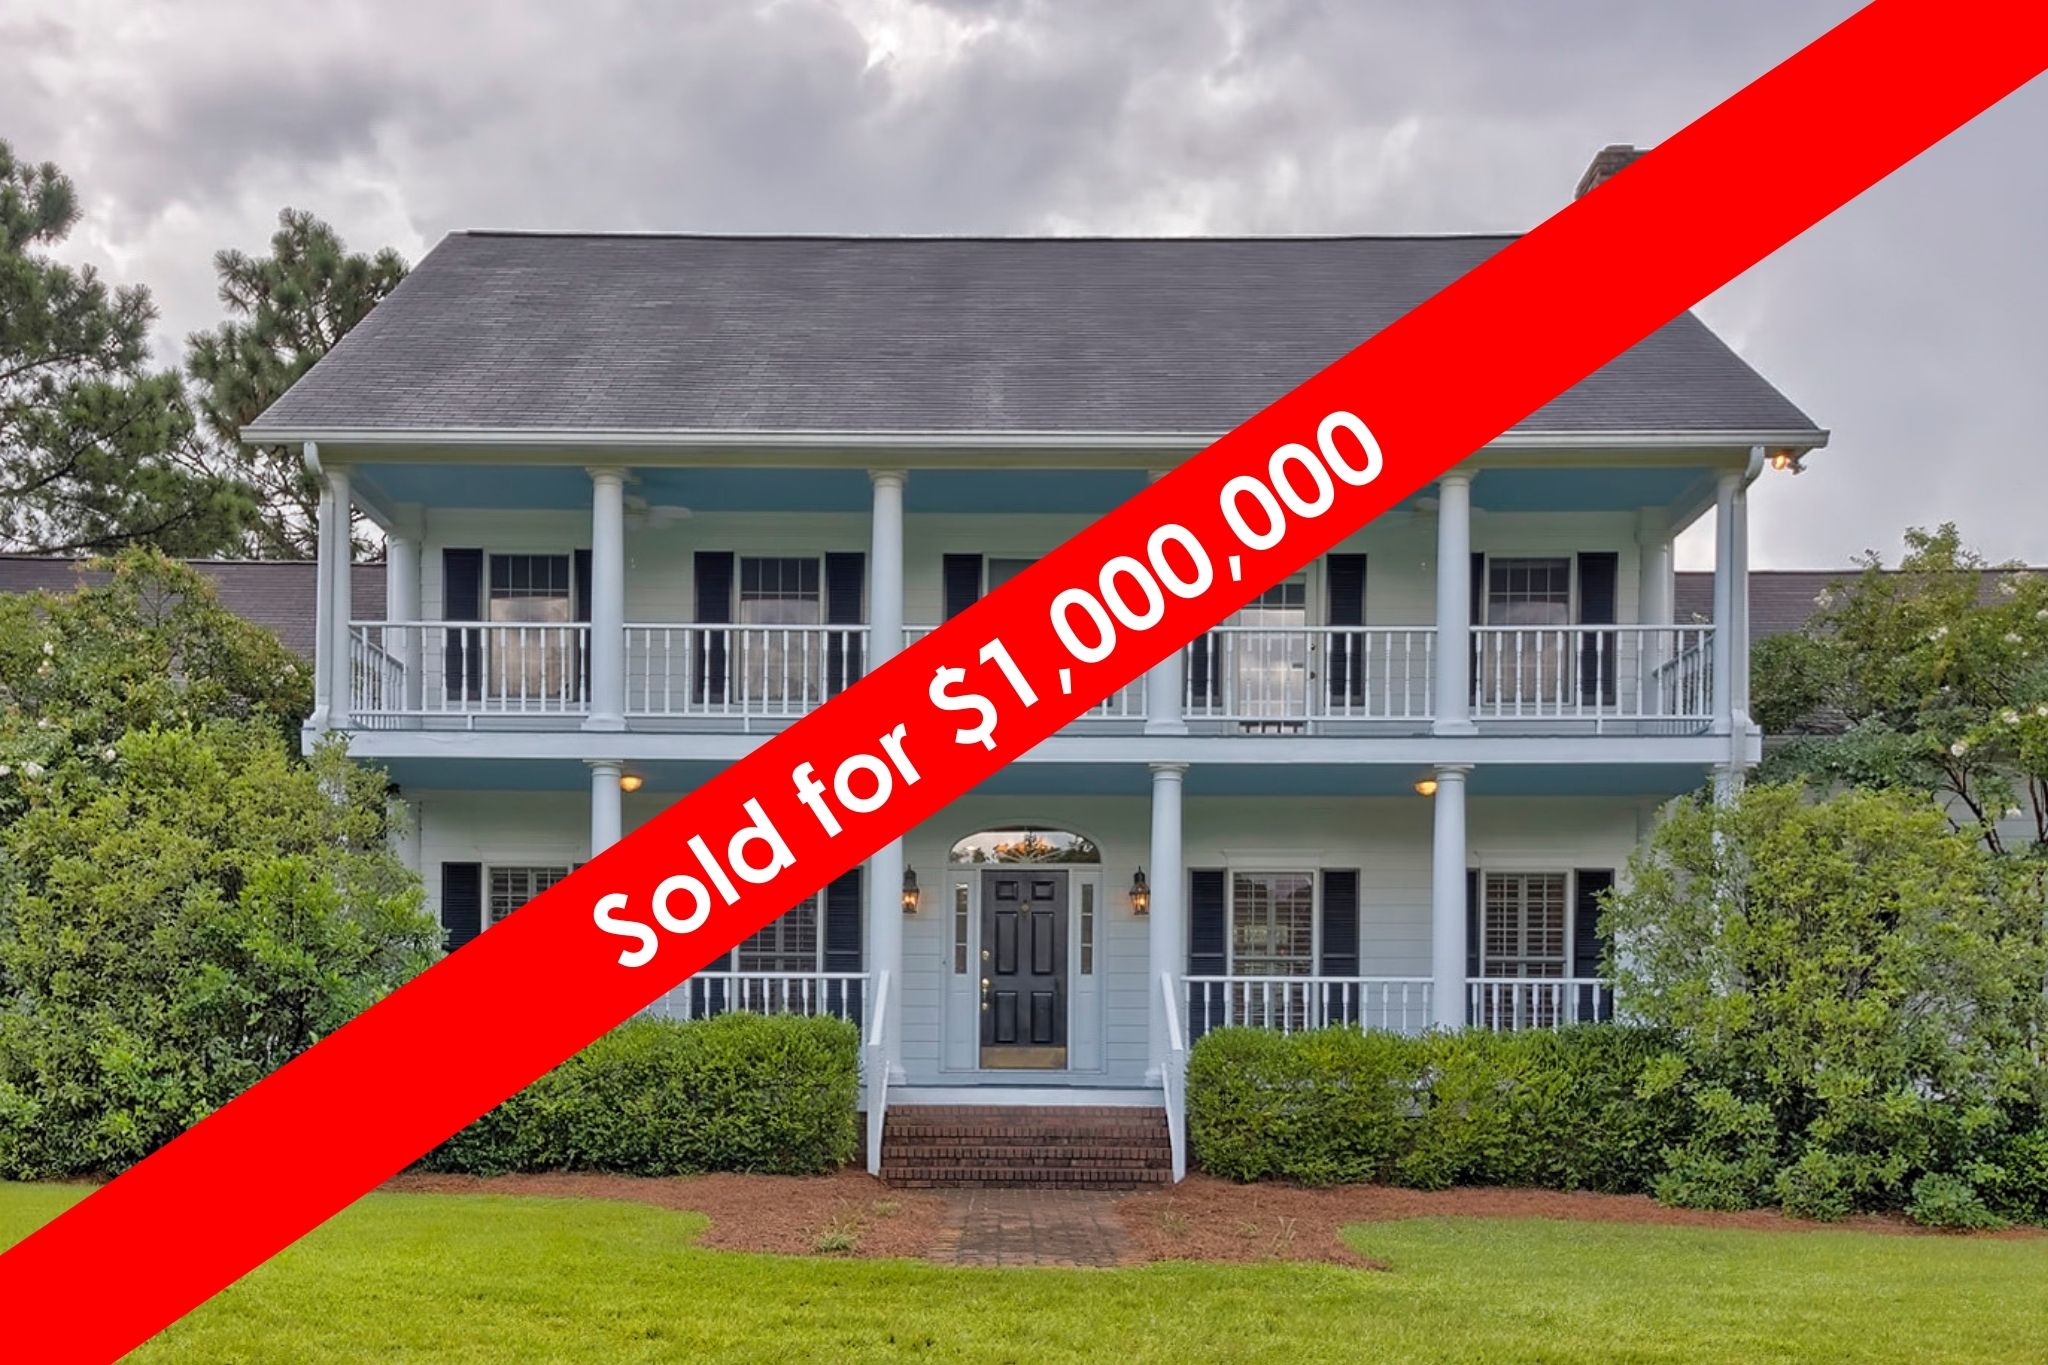 125 Kittal Road in Lexington sold for $1,000,000!